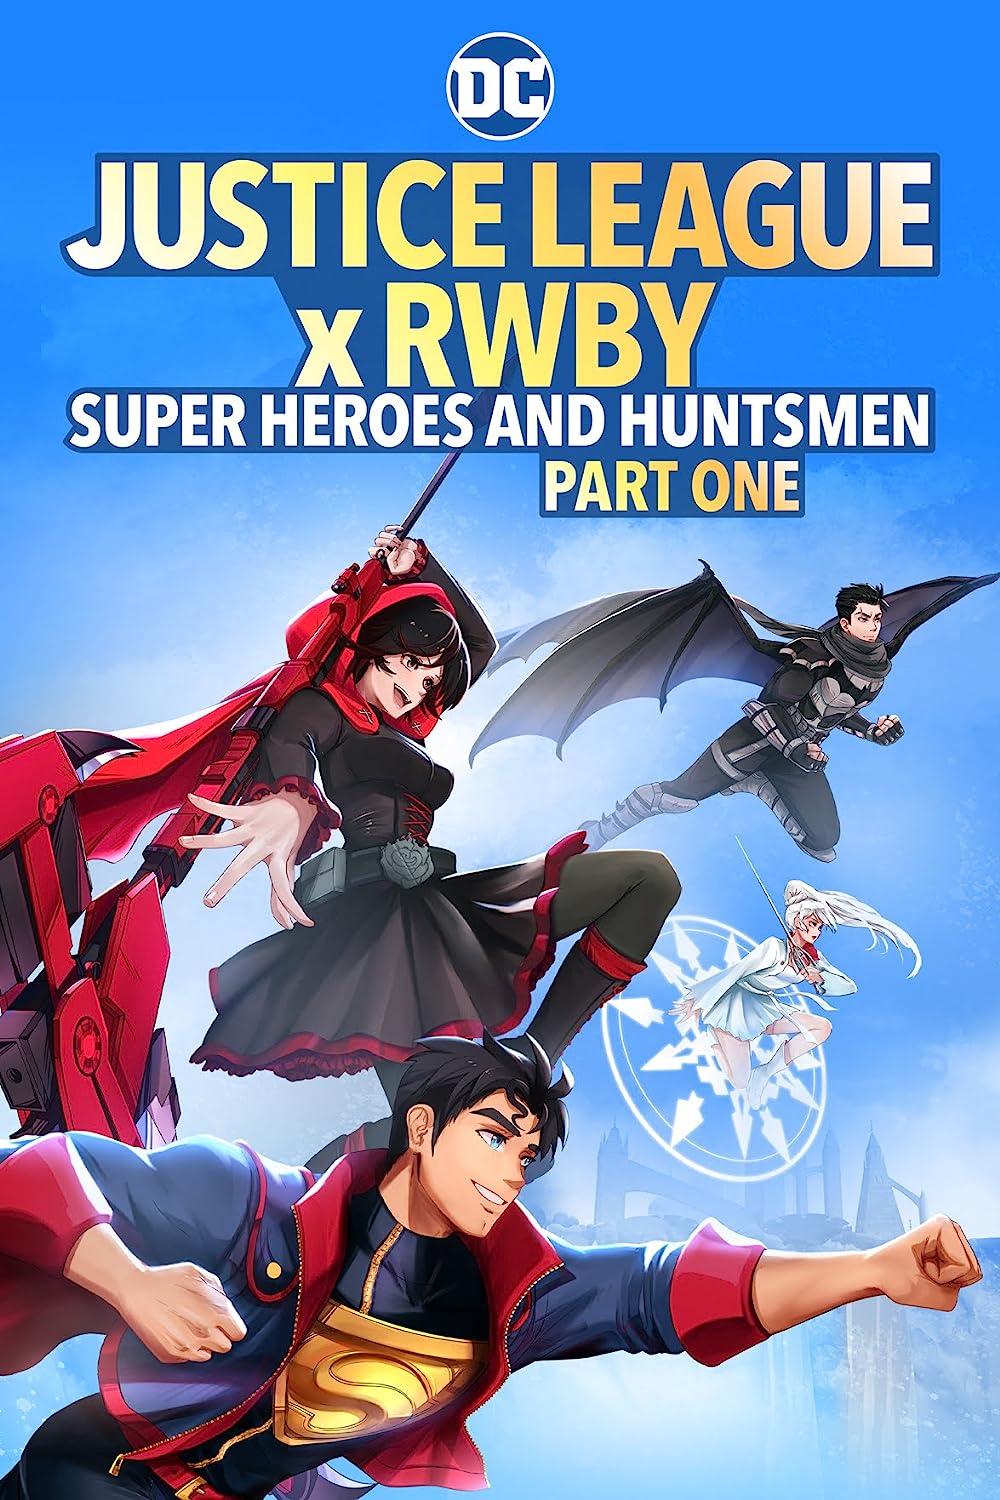 Justice League x RWBY: Super Heroes and Huntsmen Part One - Justice League x RWBY: Super Heroes and Huntsmen Part One